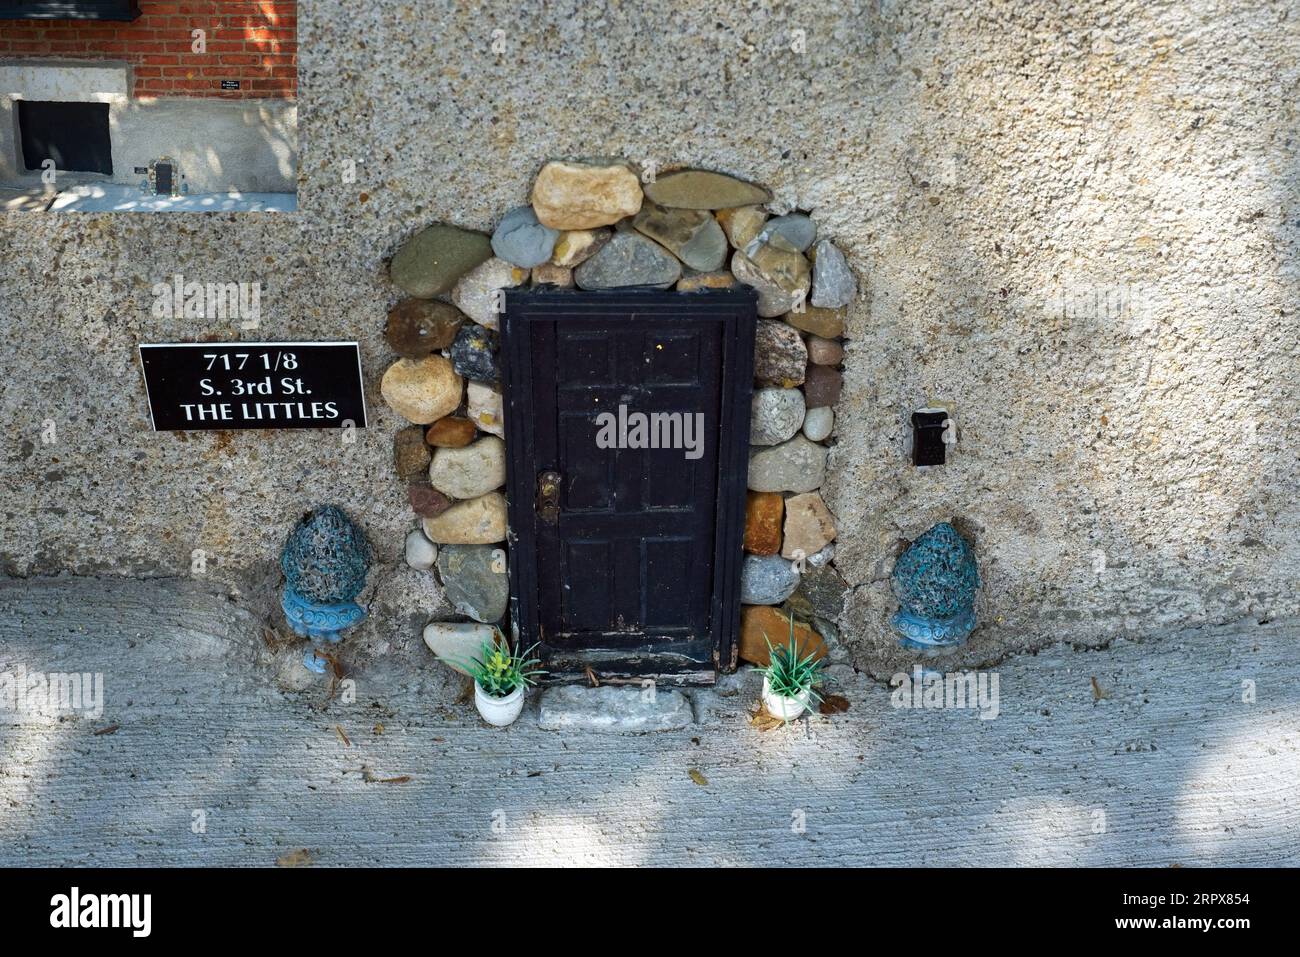 A mouse-sized doorway based on the fictional character Stuart Little adds whimsy in German Village, shown with an inset for scale. Stock Photo